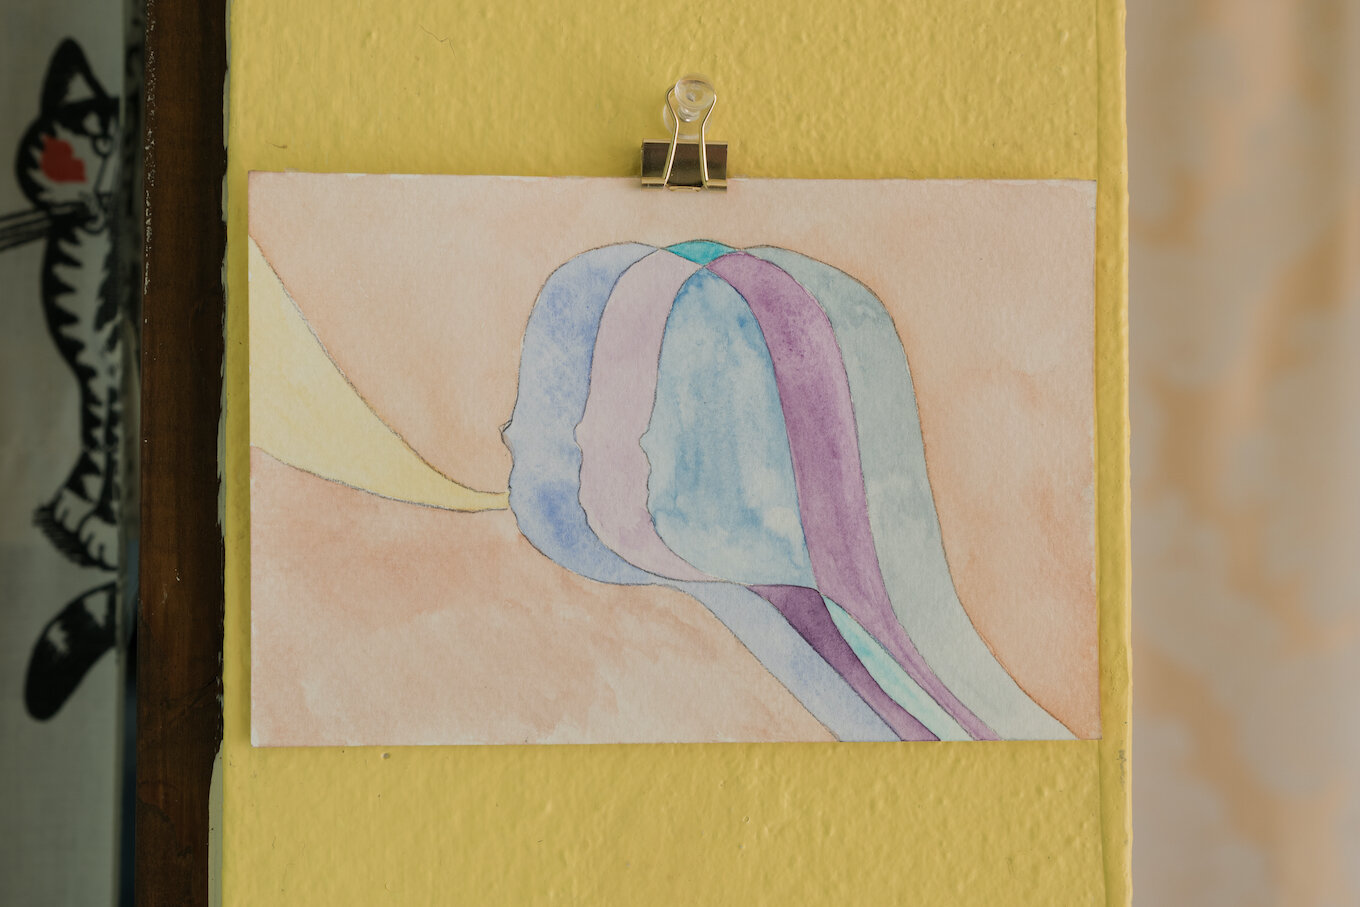  Cliff Hengst,  Untitled,  2​020, watercolor on paper, 4 x 5 3⁄4 inches 